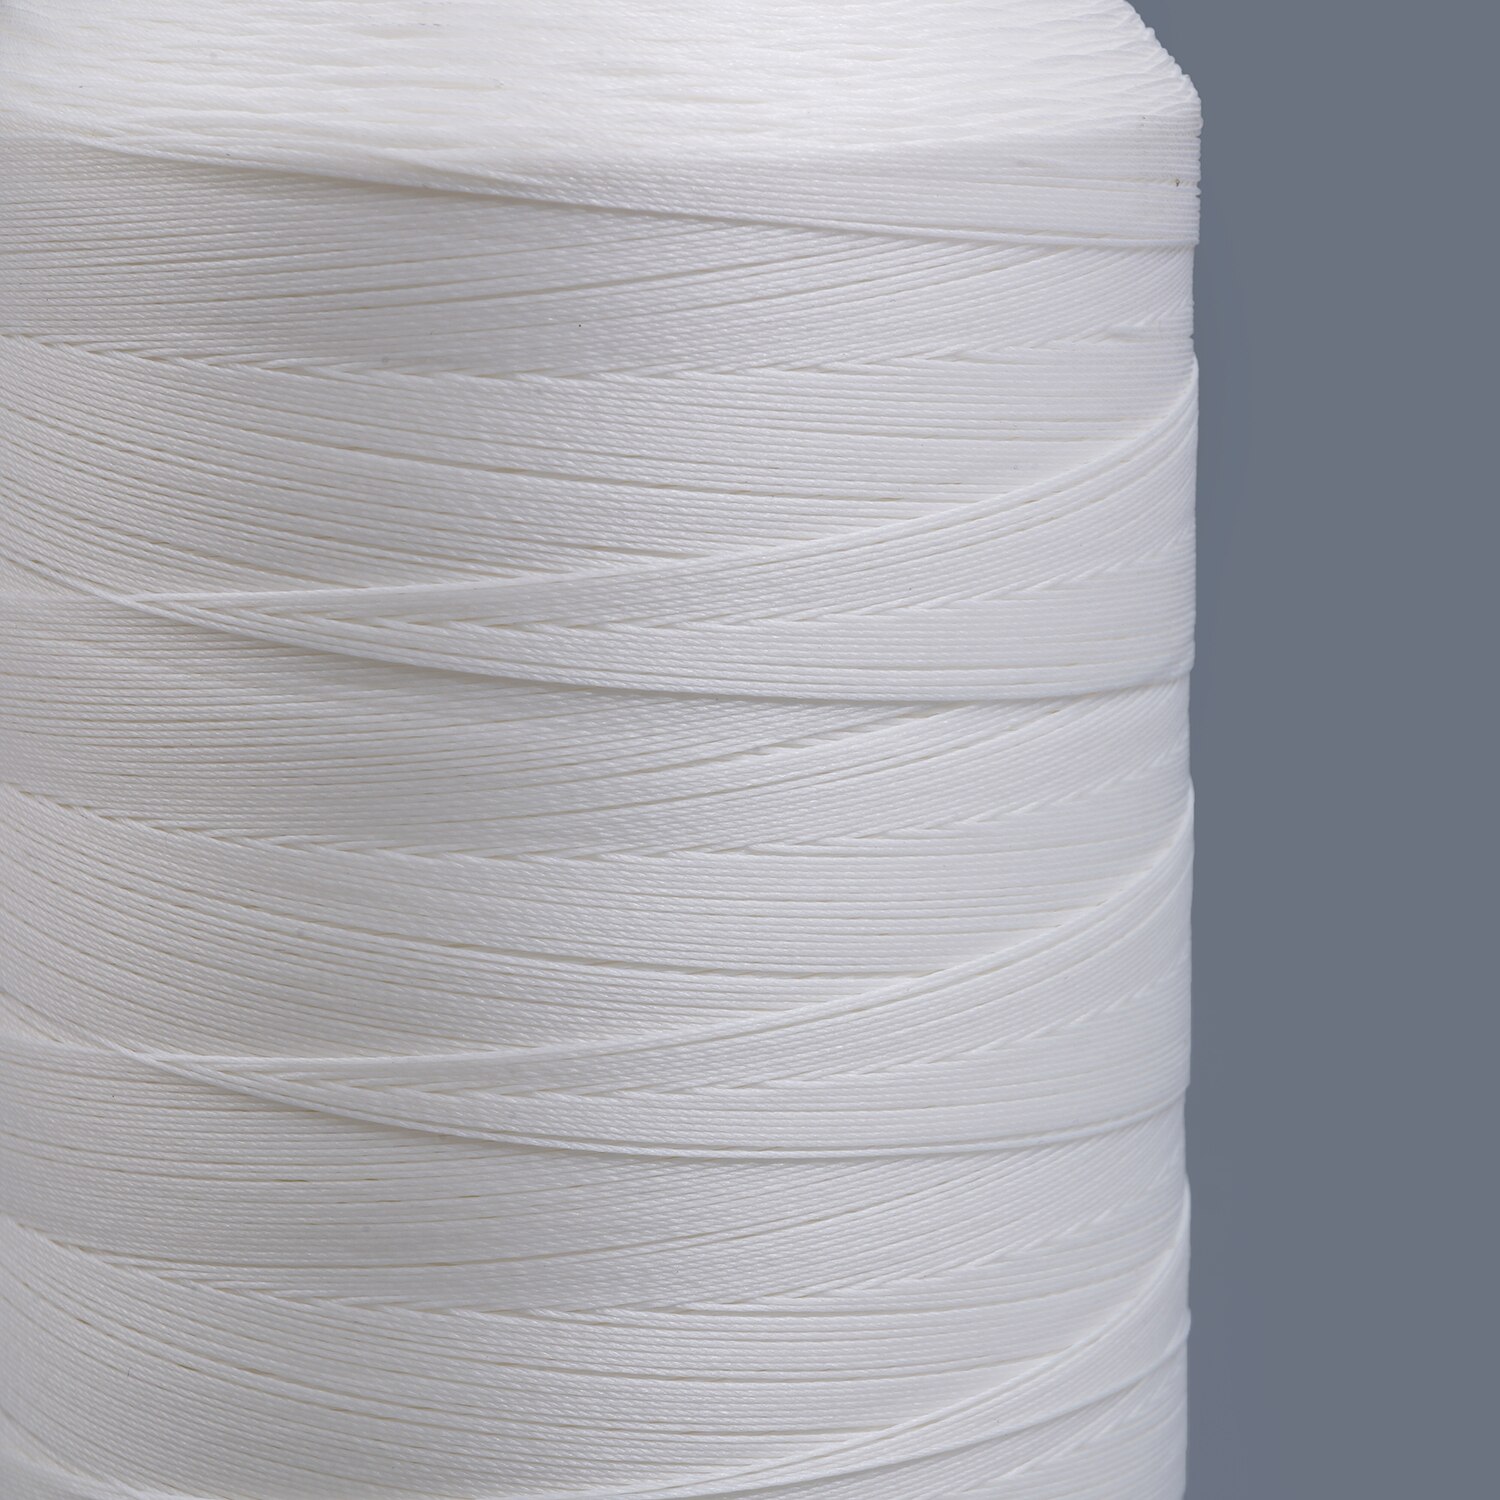 Buy Coats Ultra Dee Polyester Thread Soft Non Bonded Gral Anti-Static  Finish Size 138 (#12) White (1 Each is 16oz)